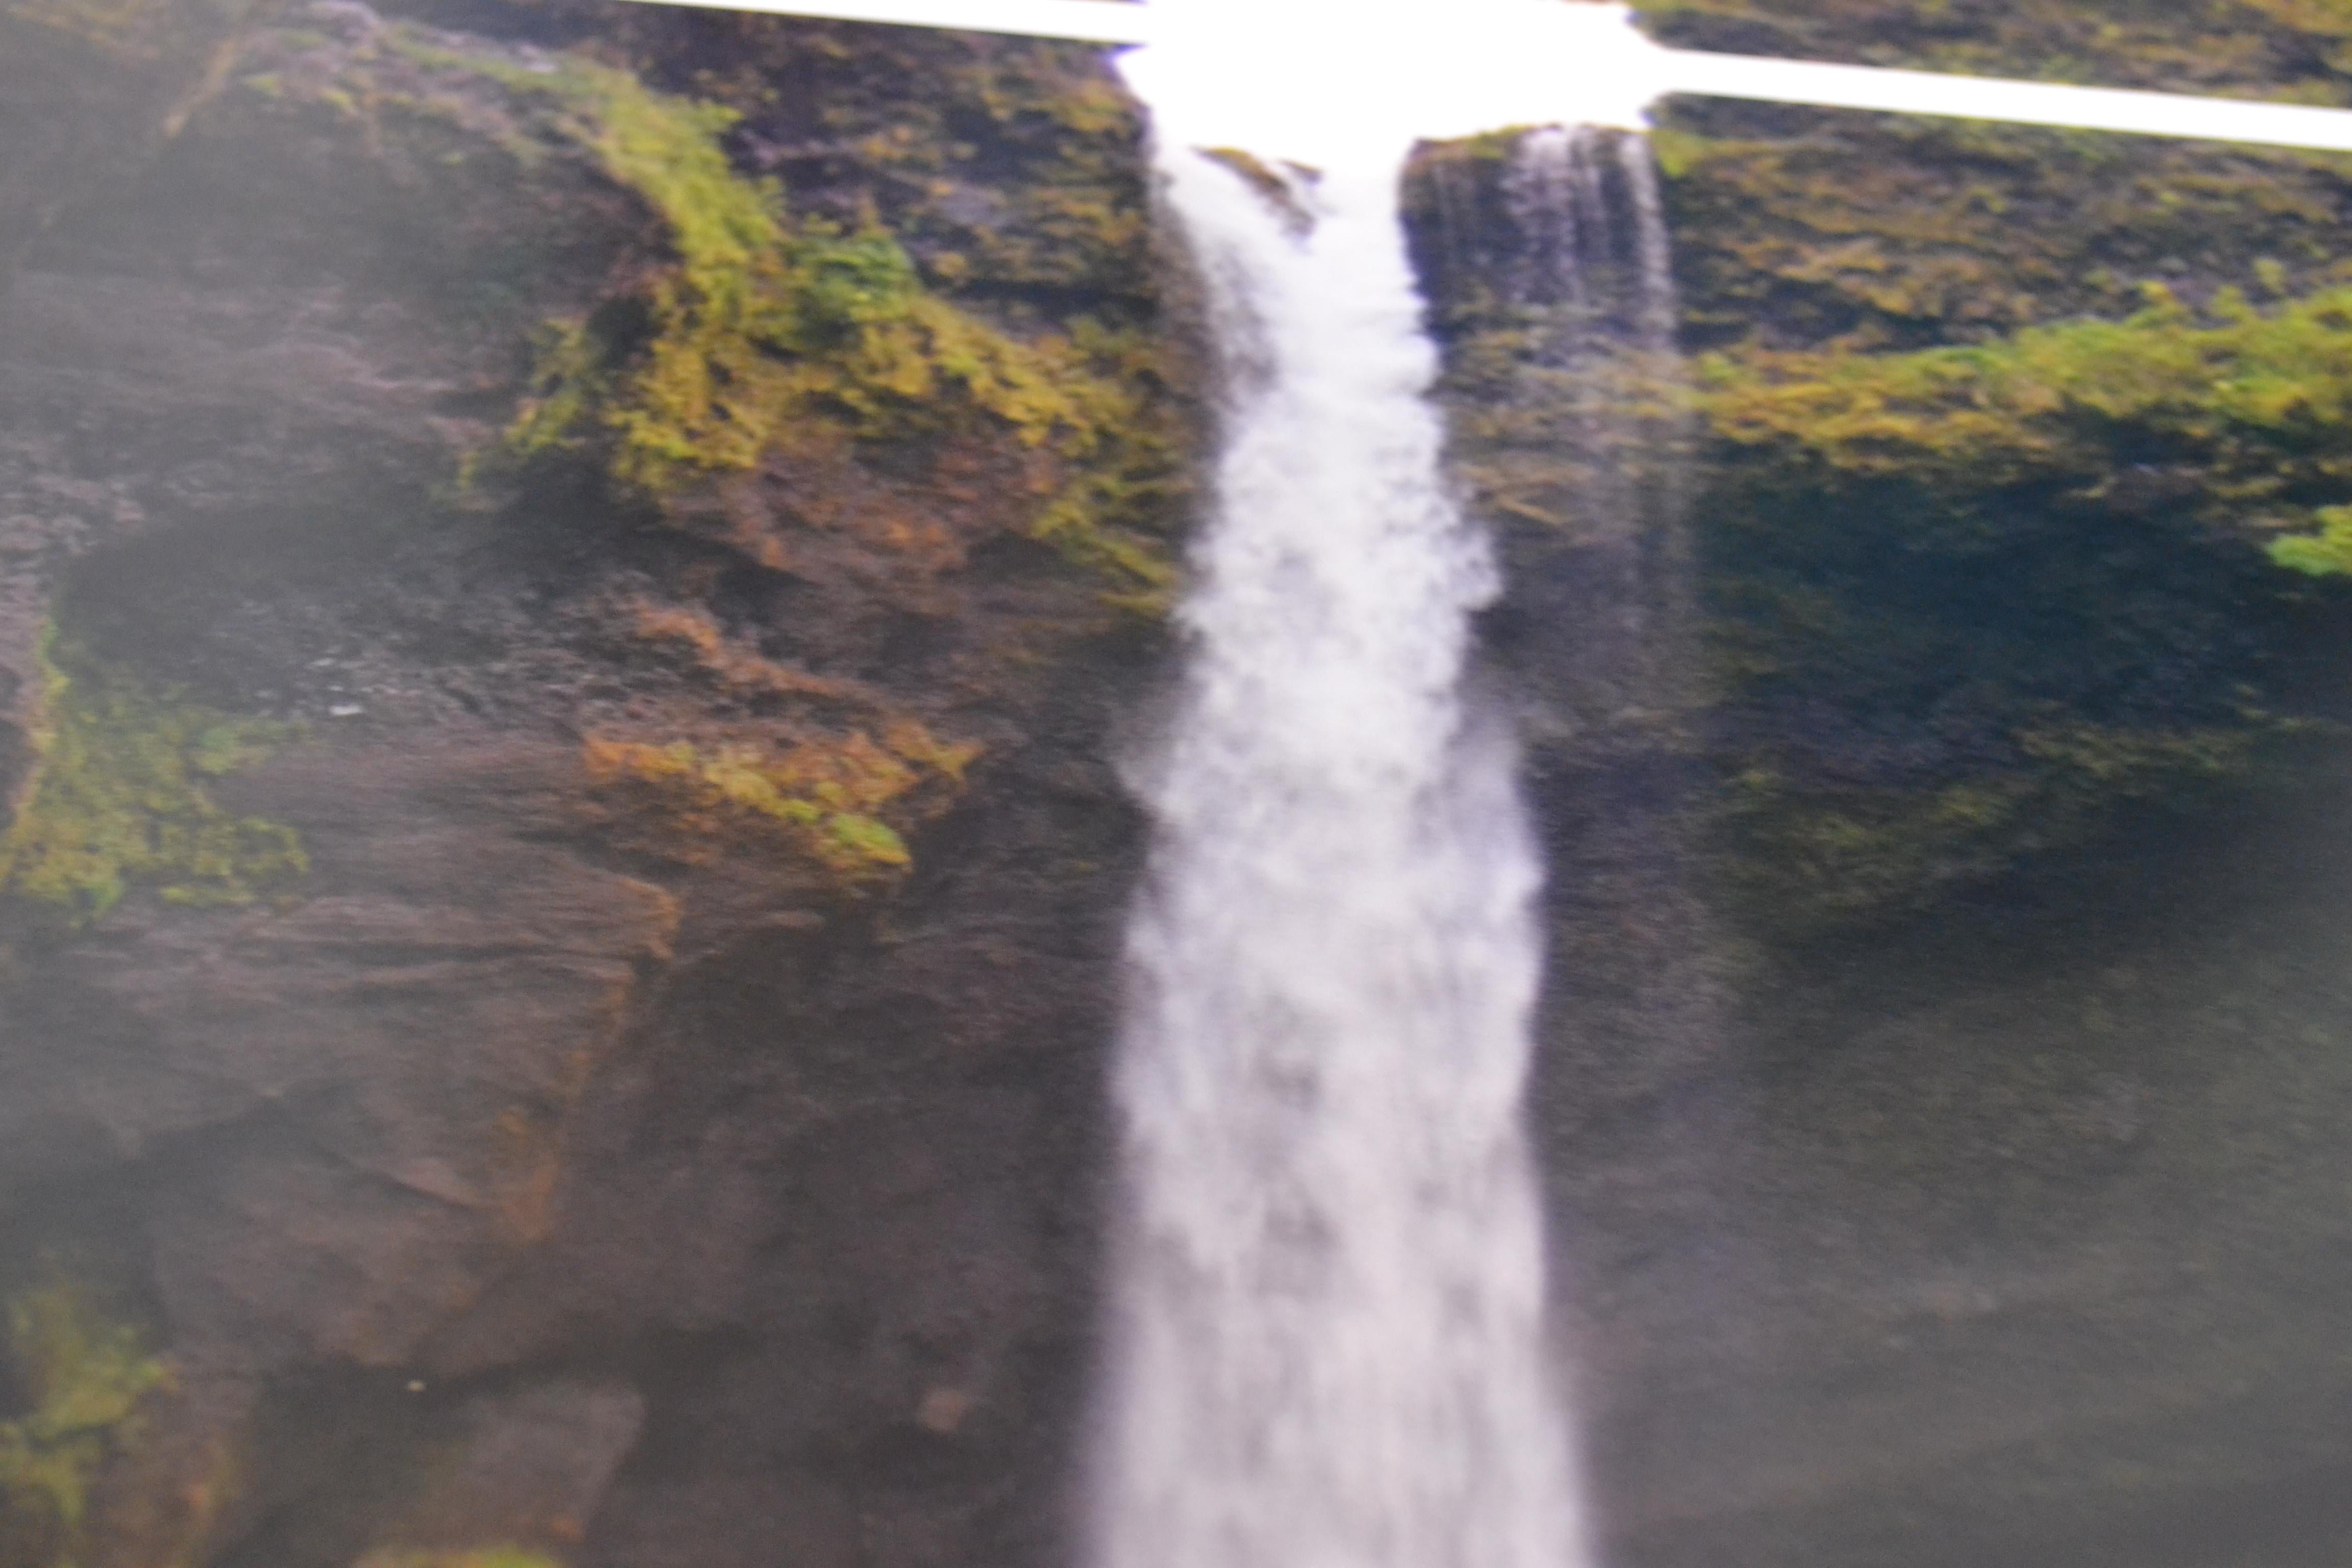 Contact is content at Seljalandsfoss, Contemporary, 21st Century, C Print For Sale 8